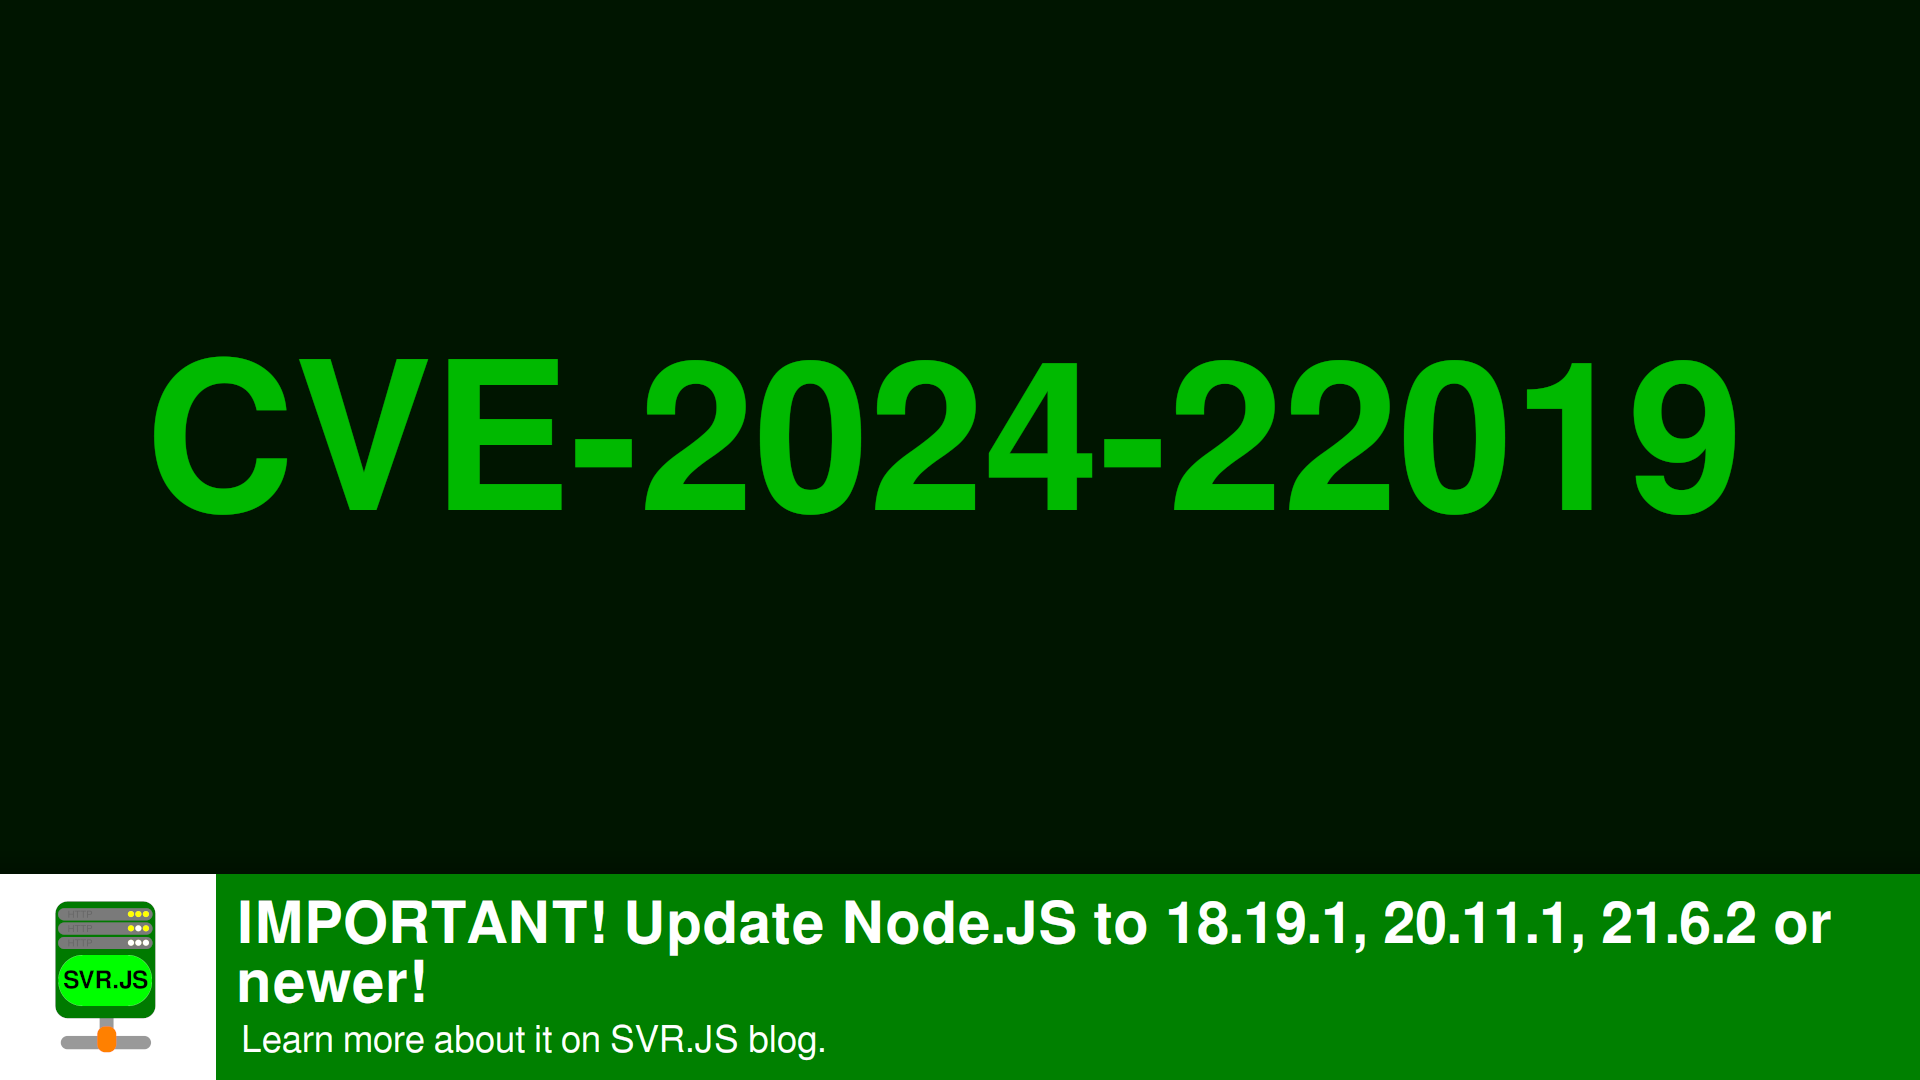 IMPORTANT! Update Node.JS to 18.19.1, 20.11.1, 21.6.2 or newer!